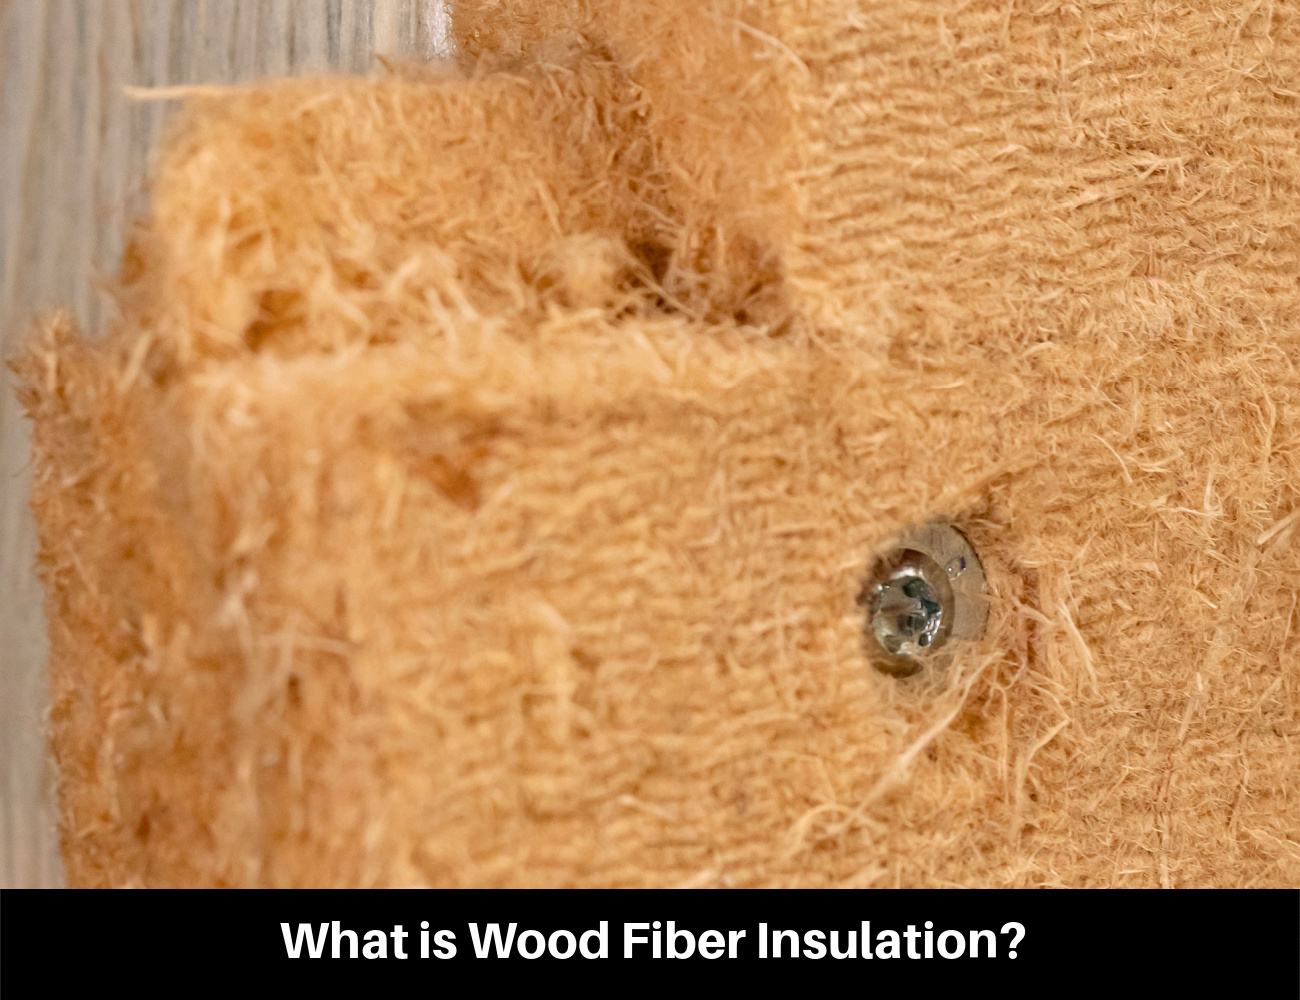 What is Wood Fiber Insulation?